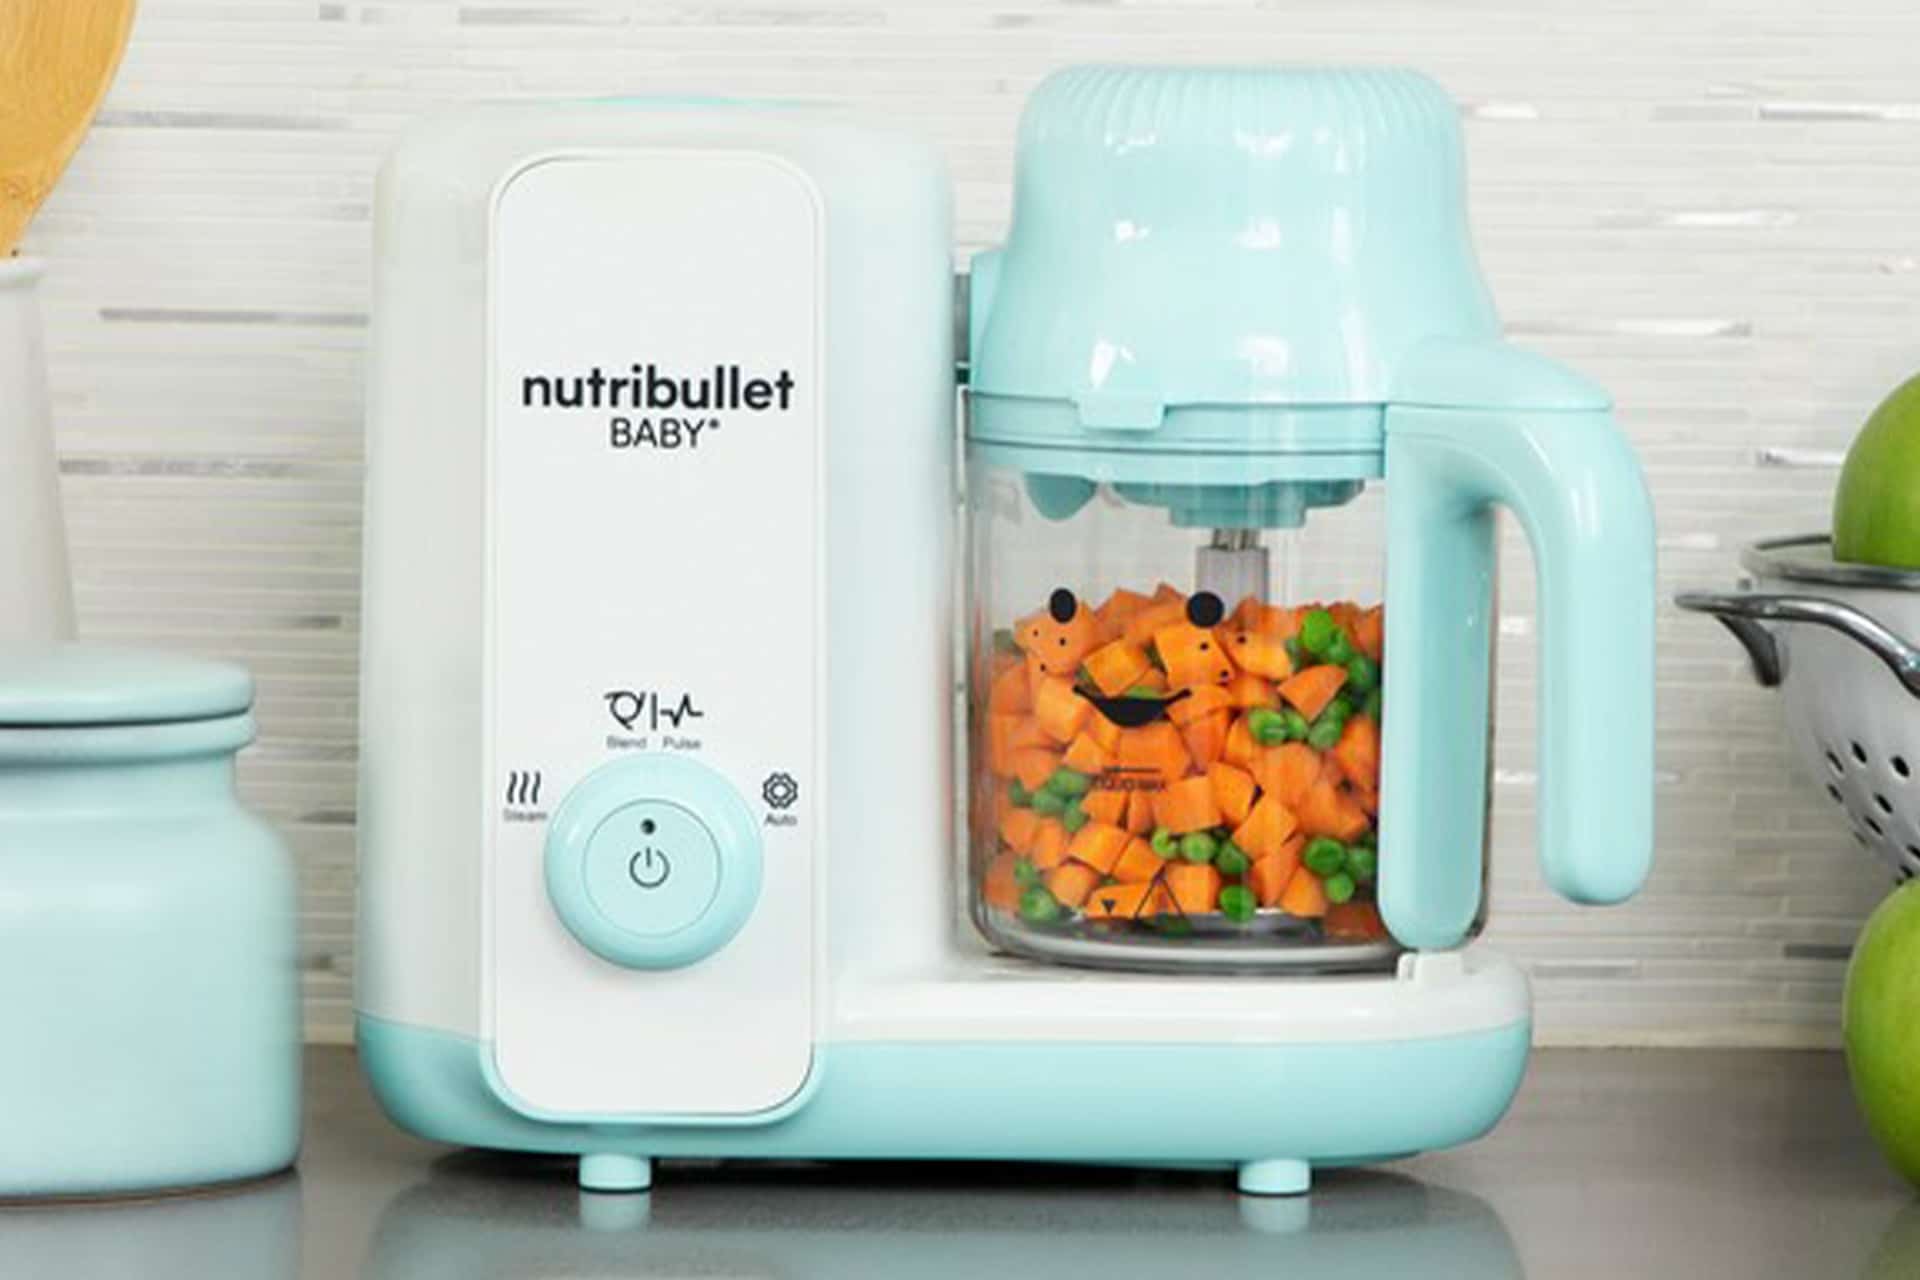 Nutribullet Baby Launches Baby Steam + Blend